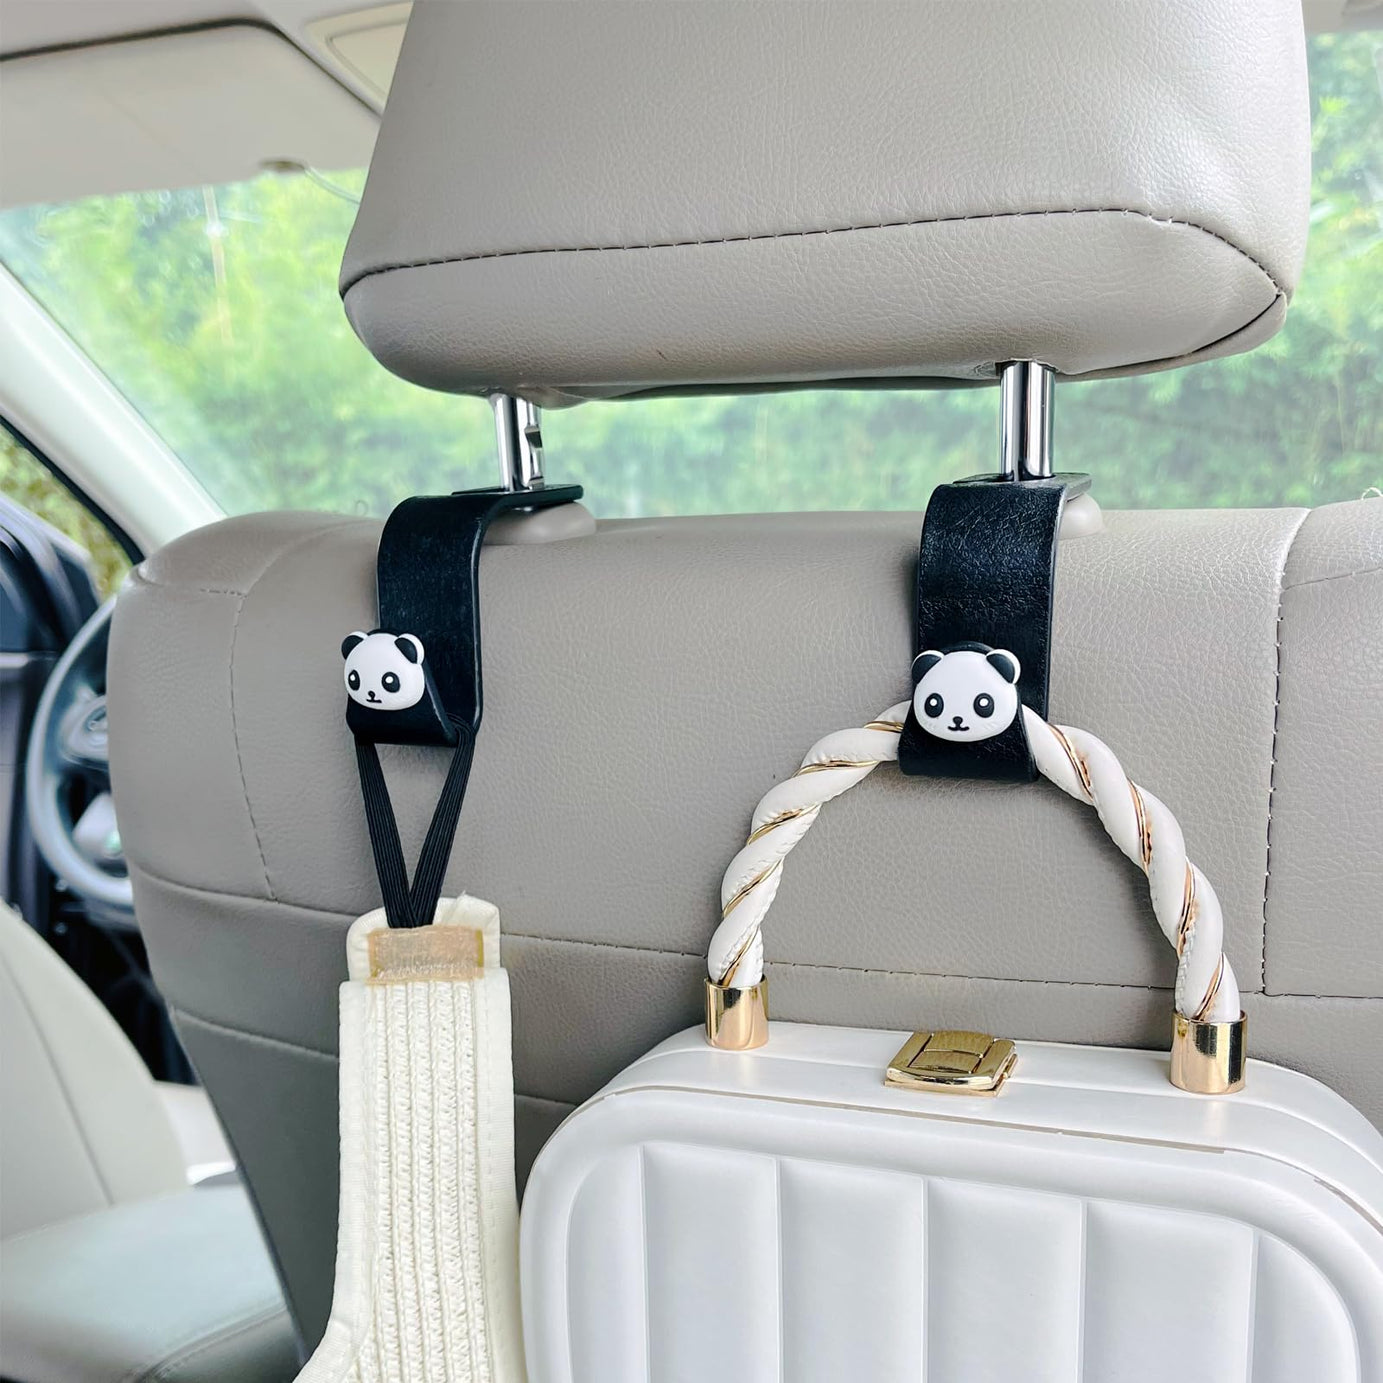 (Pack of 4) Universal Car Backseat Headrest Hangers with Creative Cartoon Seat Holder Organizer for Purses Bags etc